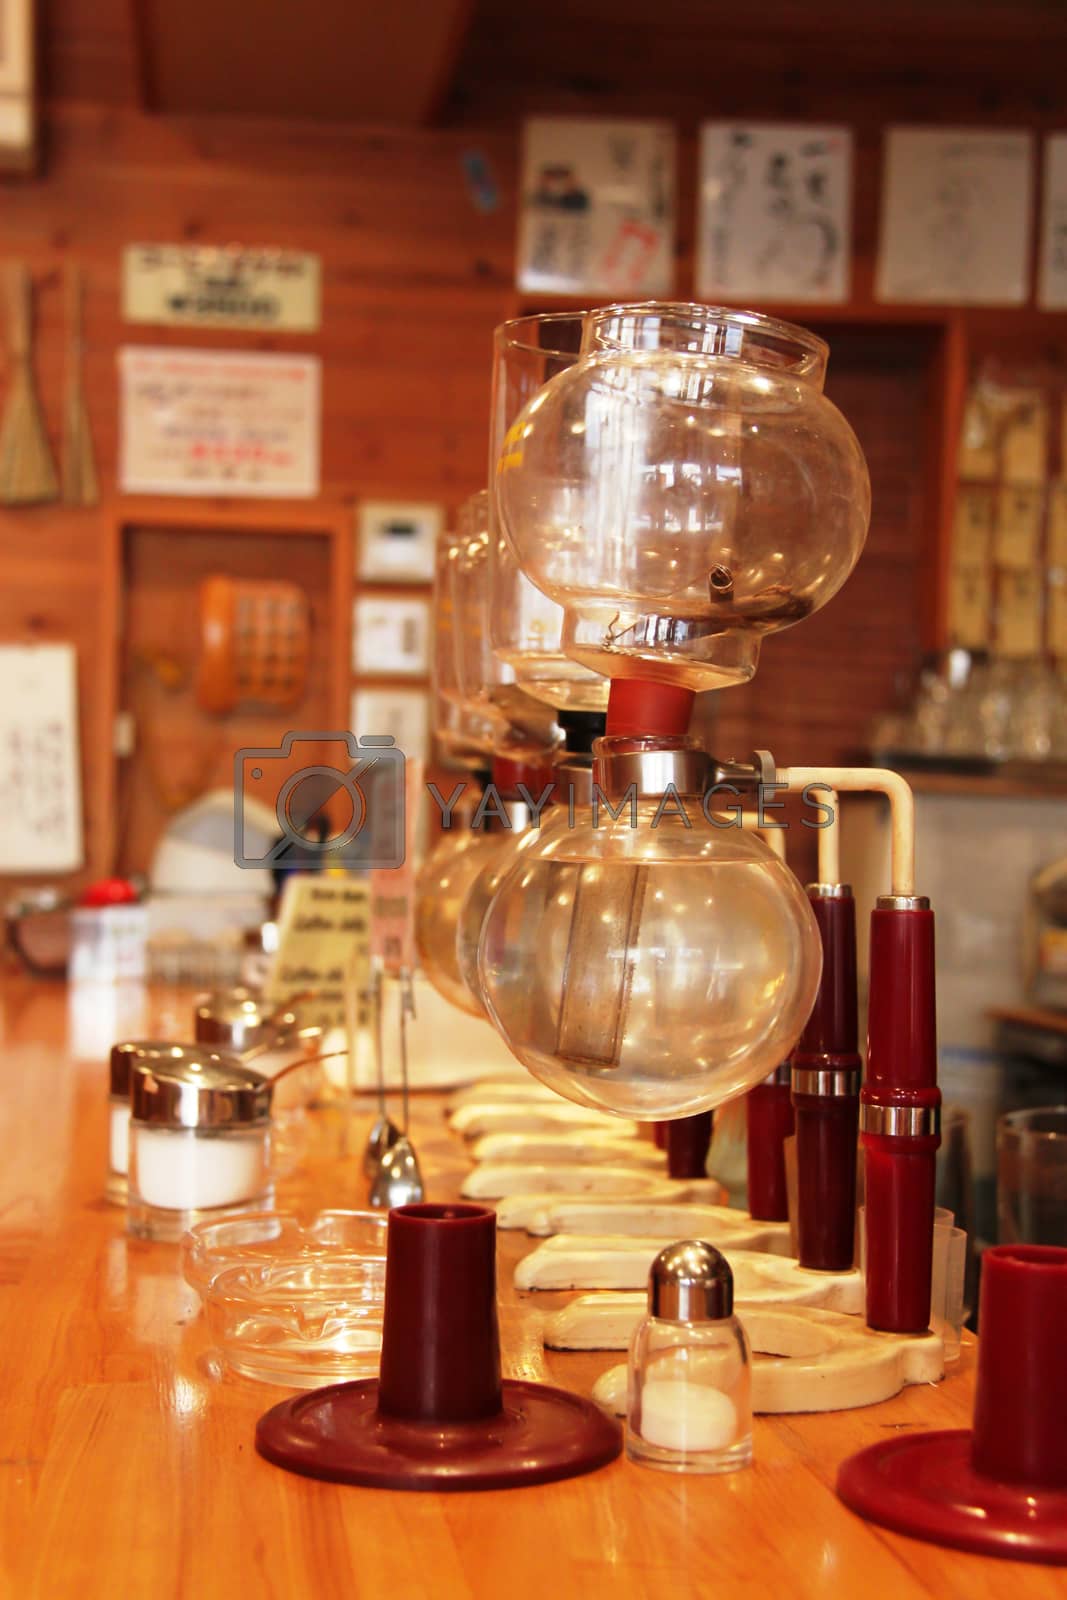 Royalty free image of Empty Yama siphon coffee brewer by juliachan